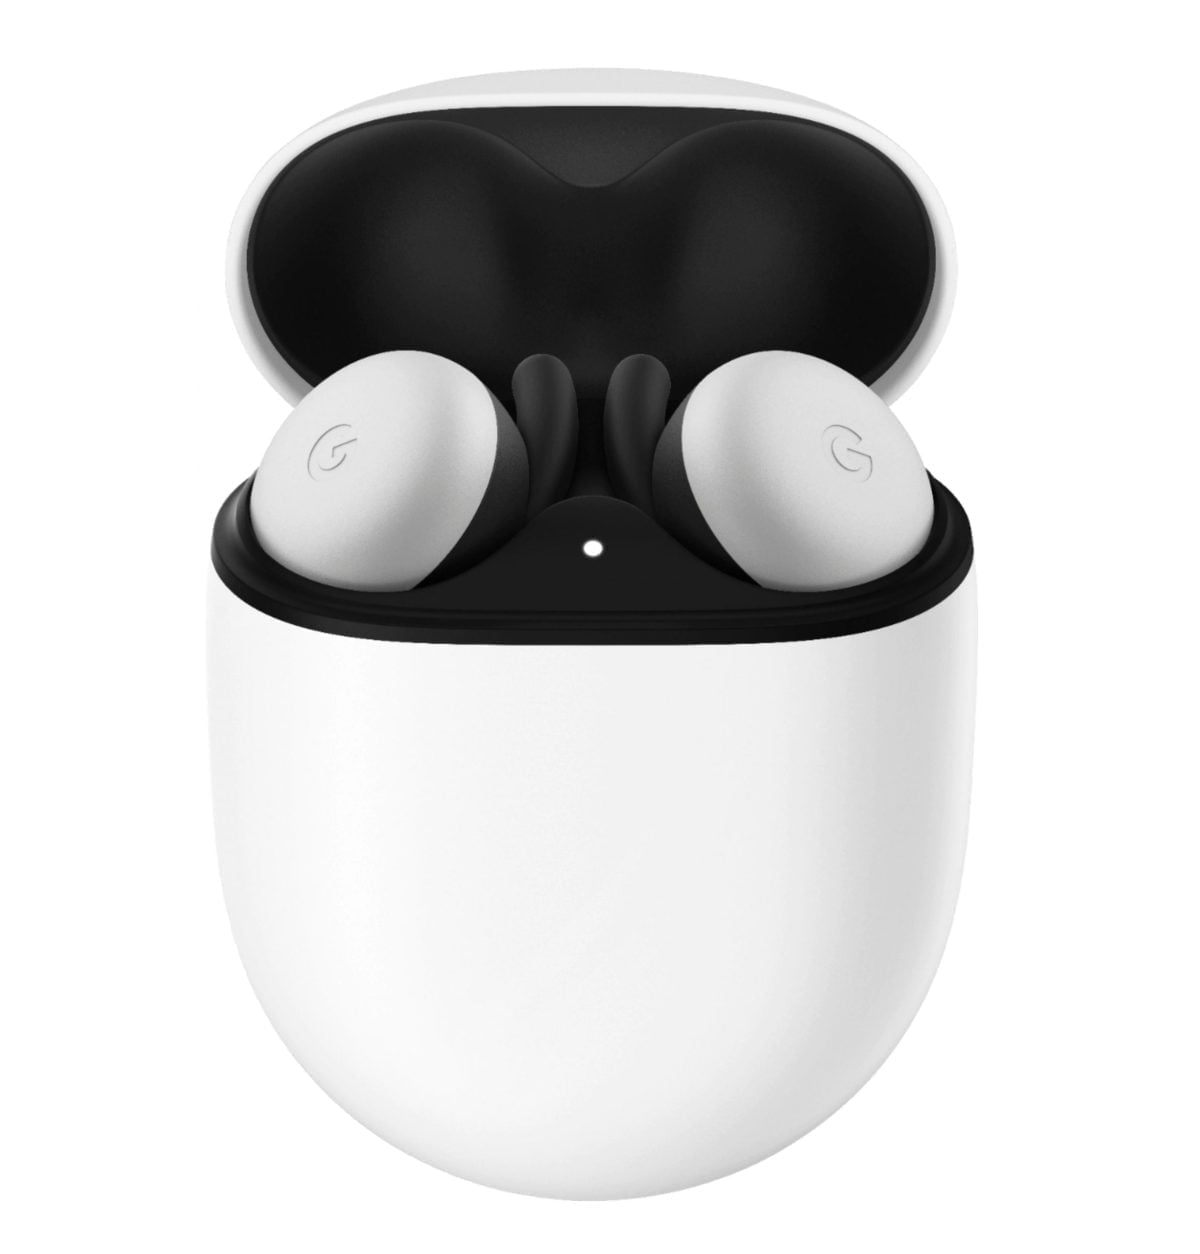 6411707 Sd Scaled Google &Lt;Div Class=&Quot;Sku-Title&Quot;&Gt; &Lt;H1 Class=&Quot;Heading-5 V-Fw-Regular&Quot;&Gt;Google - Pixel Buds True Wireless In-Ear Headphones - Clearly White&Lt;/H1&Gt; &Lt;Div Class=&Quot;Specs-Table Col-Xs-9&Quot;&Gt; &Lt;Ul&Gt; &Lt;Li&Gt; &Lt;Div Class=&Quot;Title-Container Col-Xs-6 V-Fw-Medium&Quot;&Gt; &Lt;Div Class=&Quot;Row-Title&Quot;&Gt;Product Name: Pixel Buds True Wireless In-Ear Headphones&Lt;/Div&Gt; &Lt;/Div&Gt;&Lt;/Li&Gt; &Lt;Li&Gt; &Lt;Div Class=&Quot;Title-Container Col-Xs-6 V-Fw-Medium&Quot;&Gt; &Lt;Div Class=&Quot;Row-Title&Quot;&Gt;Brand: Google&Lt;/Div&Gt; &Lt;/Div&Gt;&Lt;/Li&Gt; &Lt;Li&Gt; &Lt;Div Class=&Quot;Title-Container Col-Xs-6 V-Fw-Medium&Quot;&Gt; &Lt;Div Class=&Quot;Row-Title&Quot;&Gt;Additional Accessories Included: Wireless Charging Case, Usb-C To Usb-A Charging Cable, Large, Medium, Small Ear Tips&Lt;/Div&Gt; &Lt;/Div&Gt;&Lt;/Li&Gt; &Lt;Li&Gt; &Lt;Div Class=&Quot;Title-Container Col-Xs-6 V-Fw-Medium&Quot;&Gt; &Lt;Div Class=&Quot;Row-Title&Quot;&Gt;Ear Tip Sizes Included&Lt;/Div&Gt; &Lt;/Div&Gt; &Lt;Div Class=&Quot;Row-Value Col-Xs-6 V-Fw-Regular&Quot;&Gt;Large, Medium, Small&Lt;/Div&Gt;&Lt;/Li&Gt; &Lt;Li&Gt; &Lt;Div Class=&Quot;Title-Container Col-Xs-6 V-Fw-Medium&Quot;&Gt; &Lt;Div Class=&Quot;Row-Title&Quot;&Gt;Model Number: Ga01470-Us&Lt;/Div&Gt; &Lt;/Div&Gt;&Lt;/Li&Gt; &Lt;Li&Gt; &Lt;Div Class=&Quot;Title-Container Col-Xs-6 V-Fw-Medium&Quot;&Gt; &Lt;Div Class=&Quot;Row-Title&Quot;&Gt;Color: Clearly White&Lt;/Div&Gt; &Lt;/Div&Gt;&Lt;/Li&Gt; &Lt;/Ul&Gt; &Lt;/Div&Gt; &Lt;/Div&Gt; Google - Pixel Buds Google - Pixel Buds True Wireless In-Ear Headphones - Clearly White